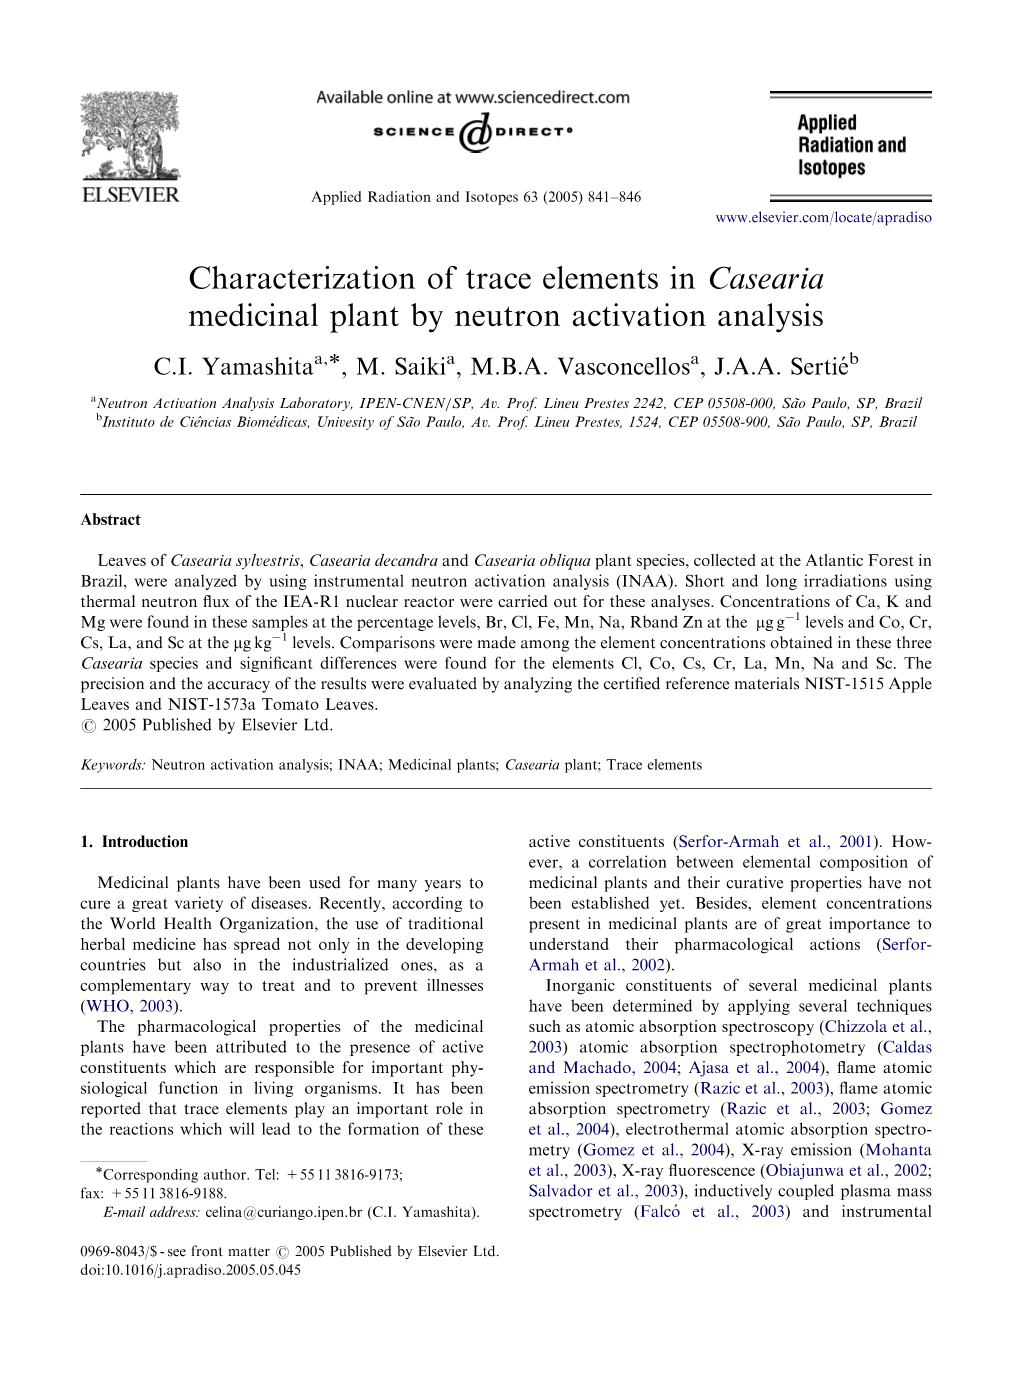 Characterization of Trace Elements in Casearia Medicinal Plant by Neutron Activation Analysis C.I